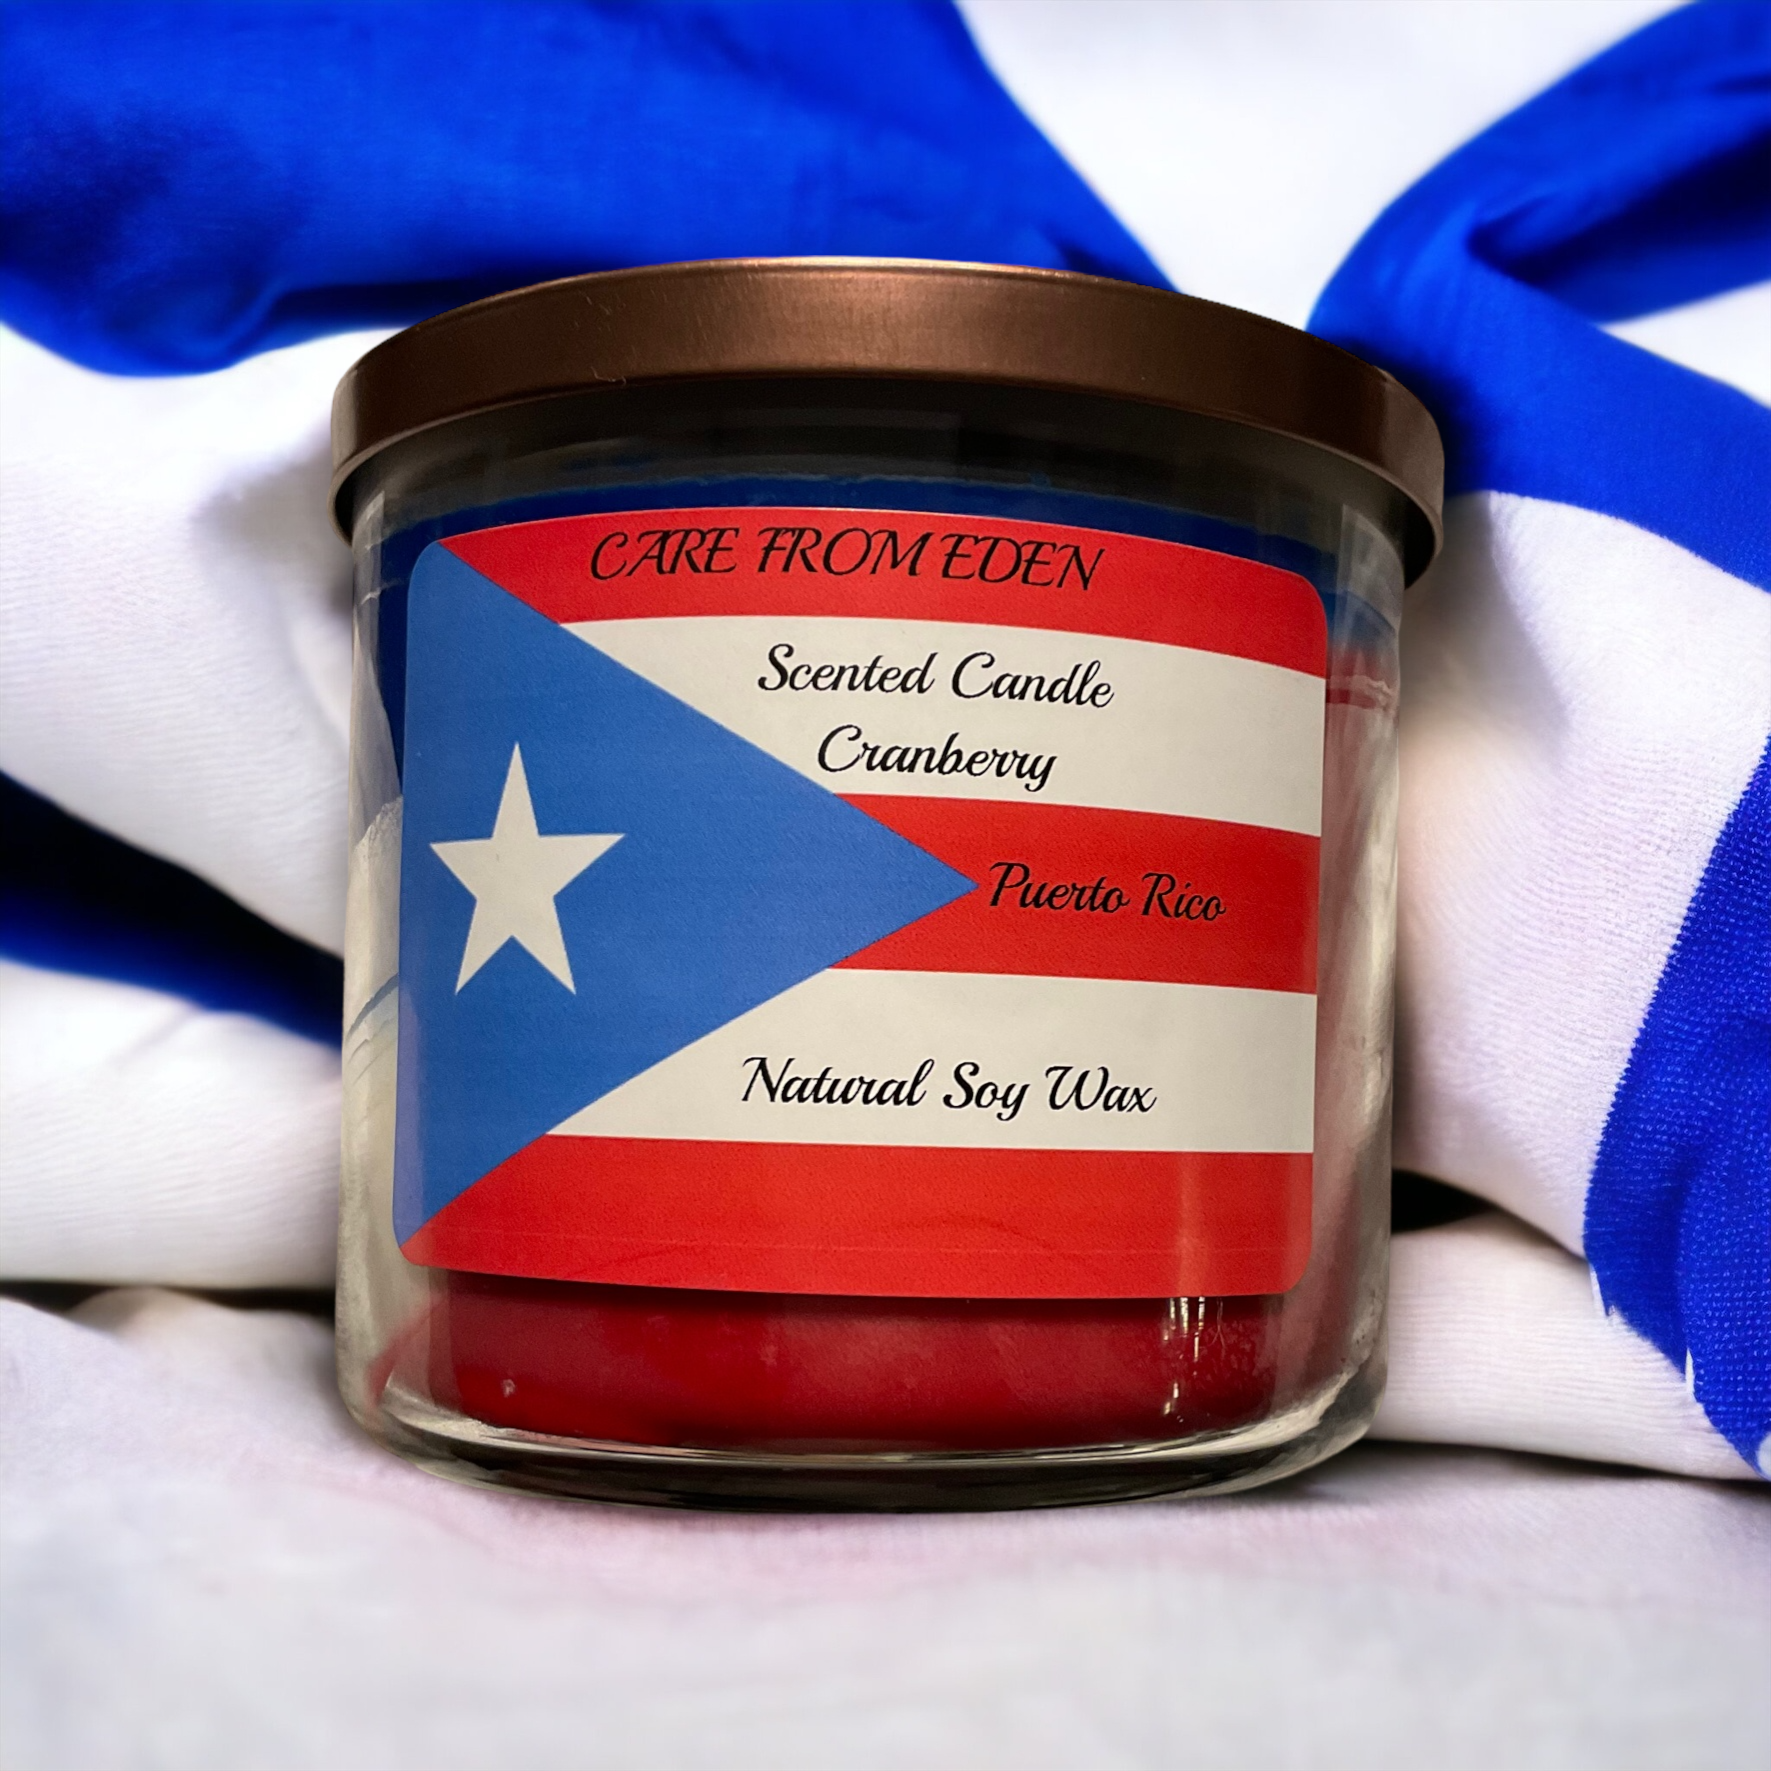 Triple Wick Scented Candle.Puerto Rico. Cranberry ; 14 oz